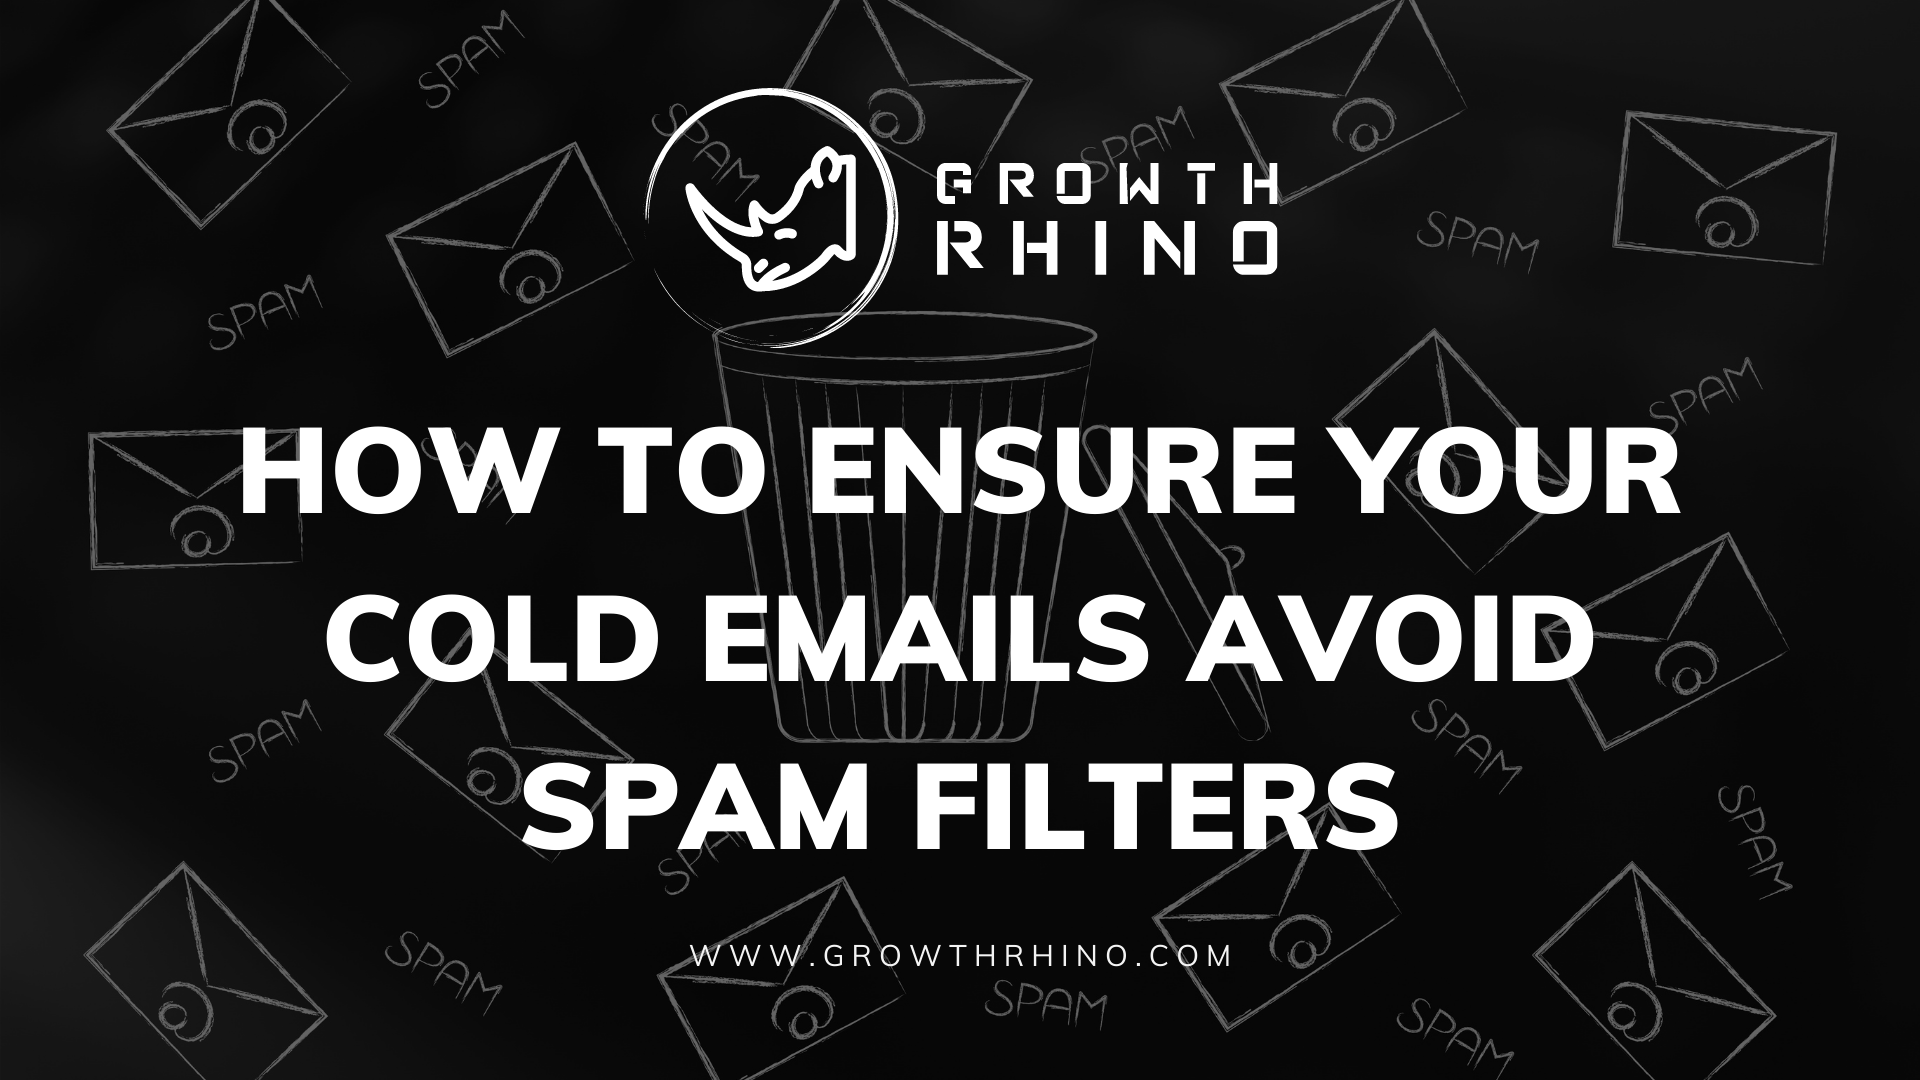 How To Ensure Your Cold Emails Avoid Spam Filters Growth Rhino Inc